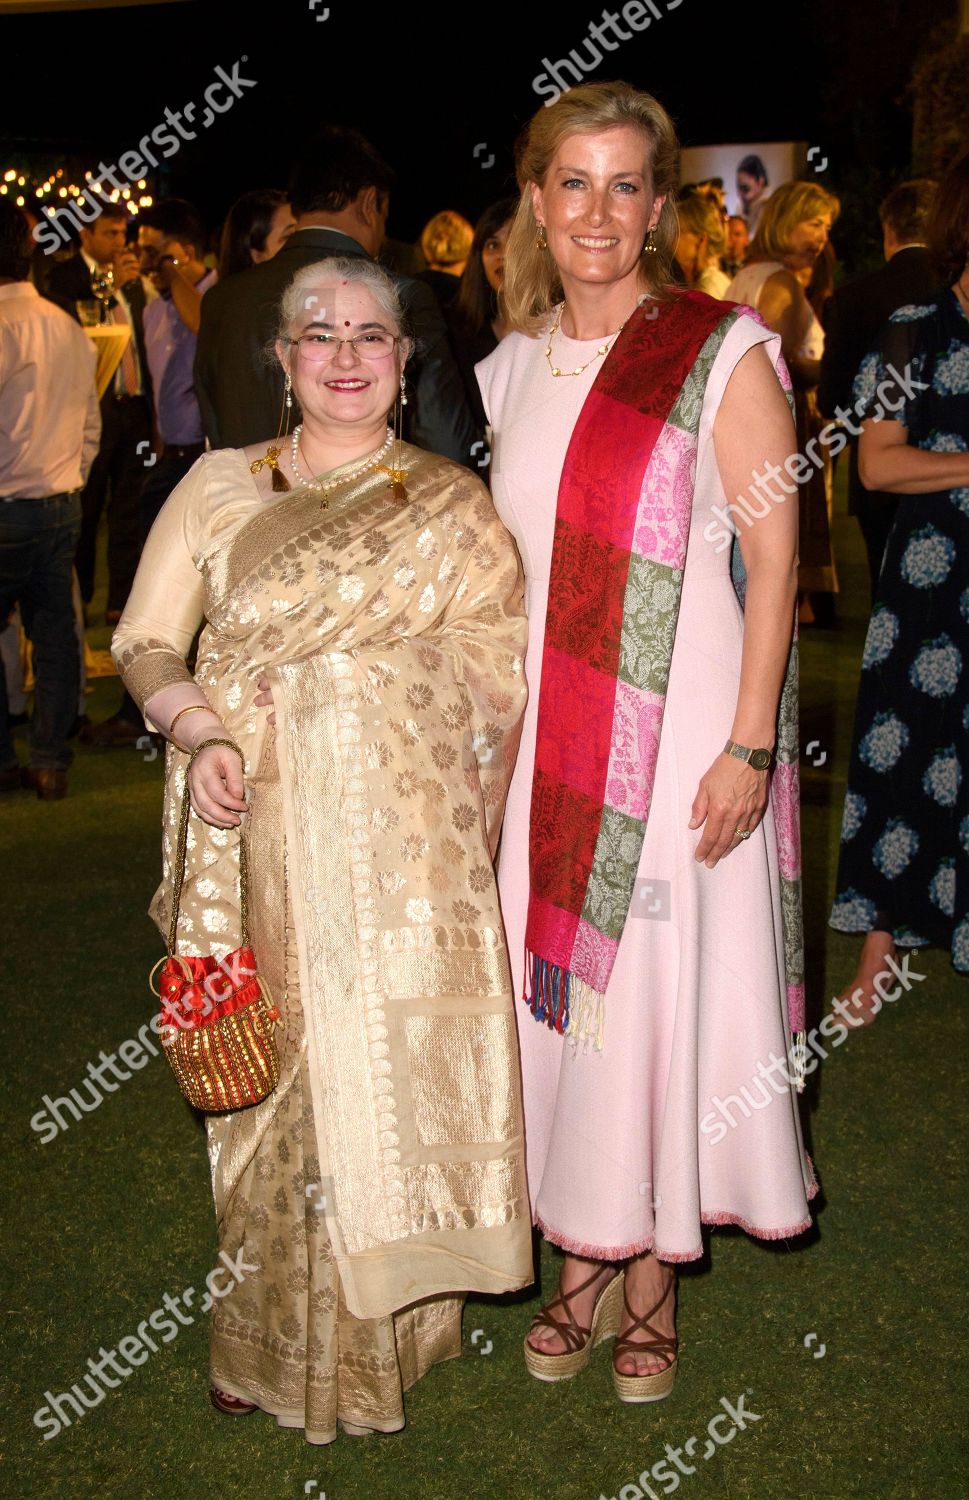 sophie-countess-of-wessex-visit-to-india-shutterstock-editorial-10226793k.jpg